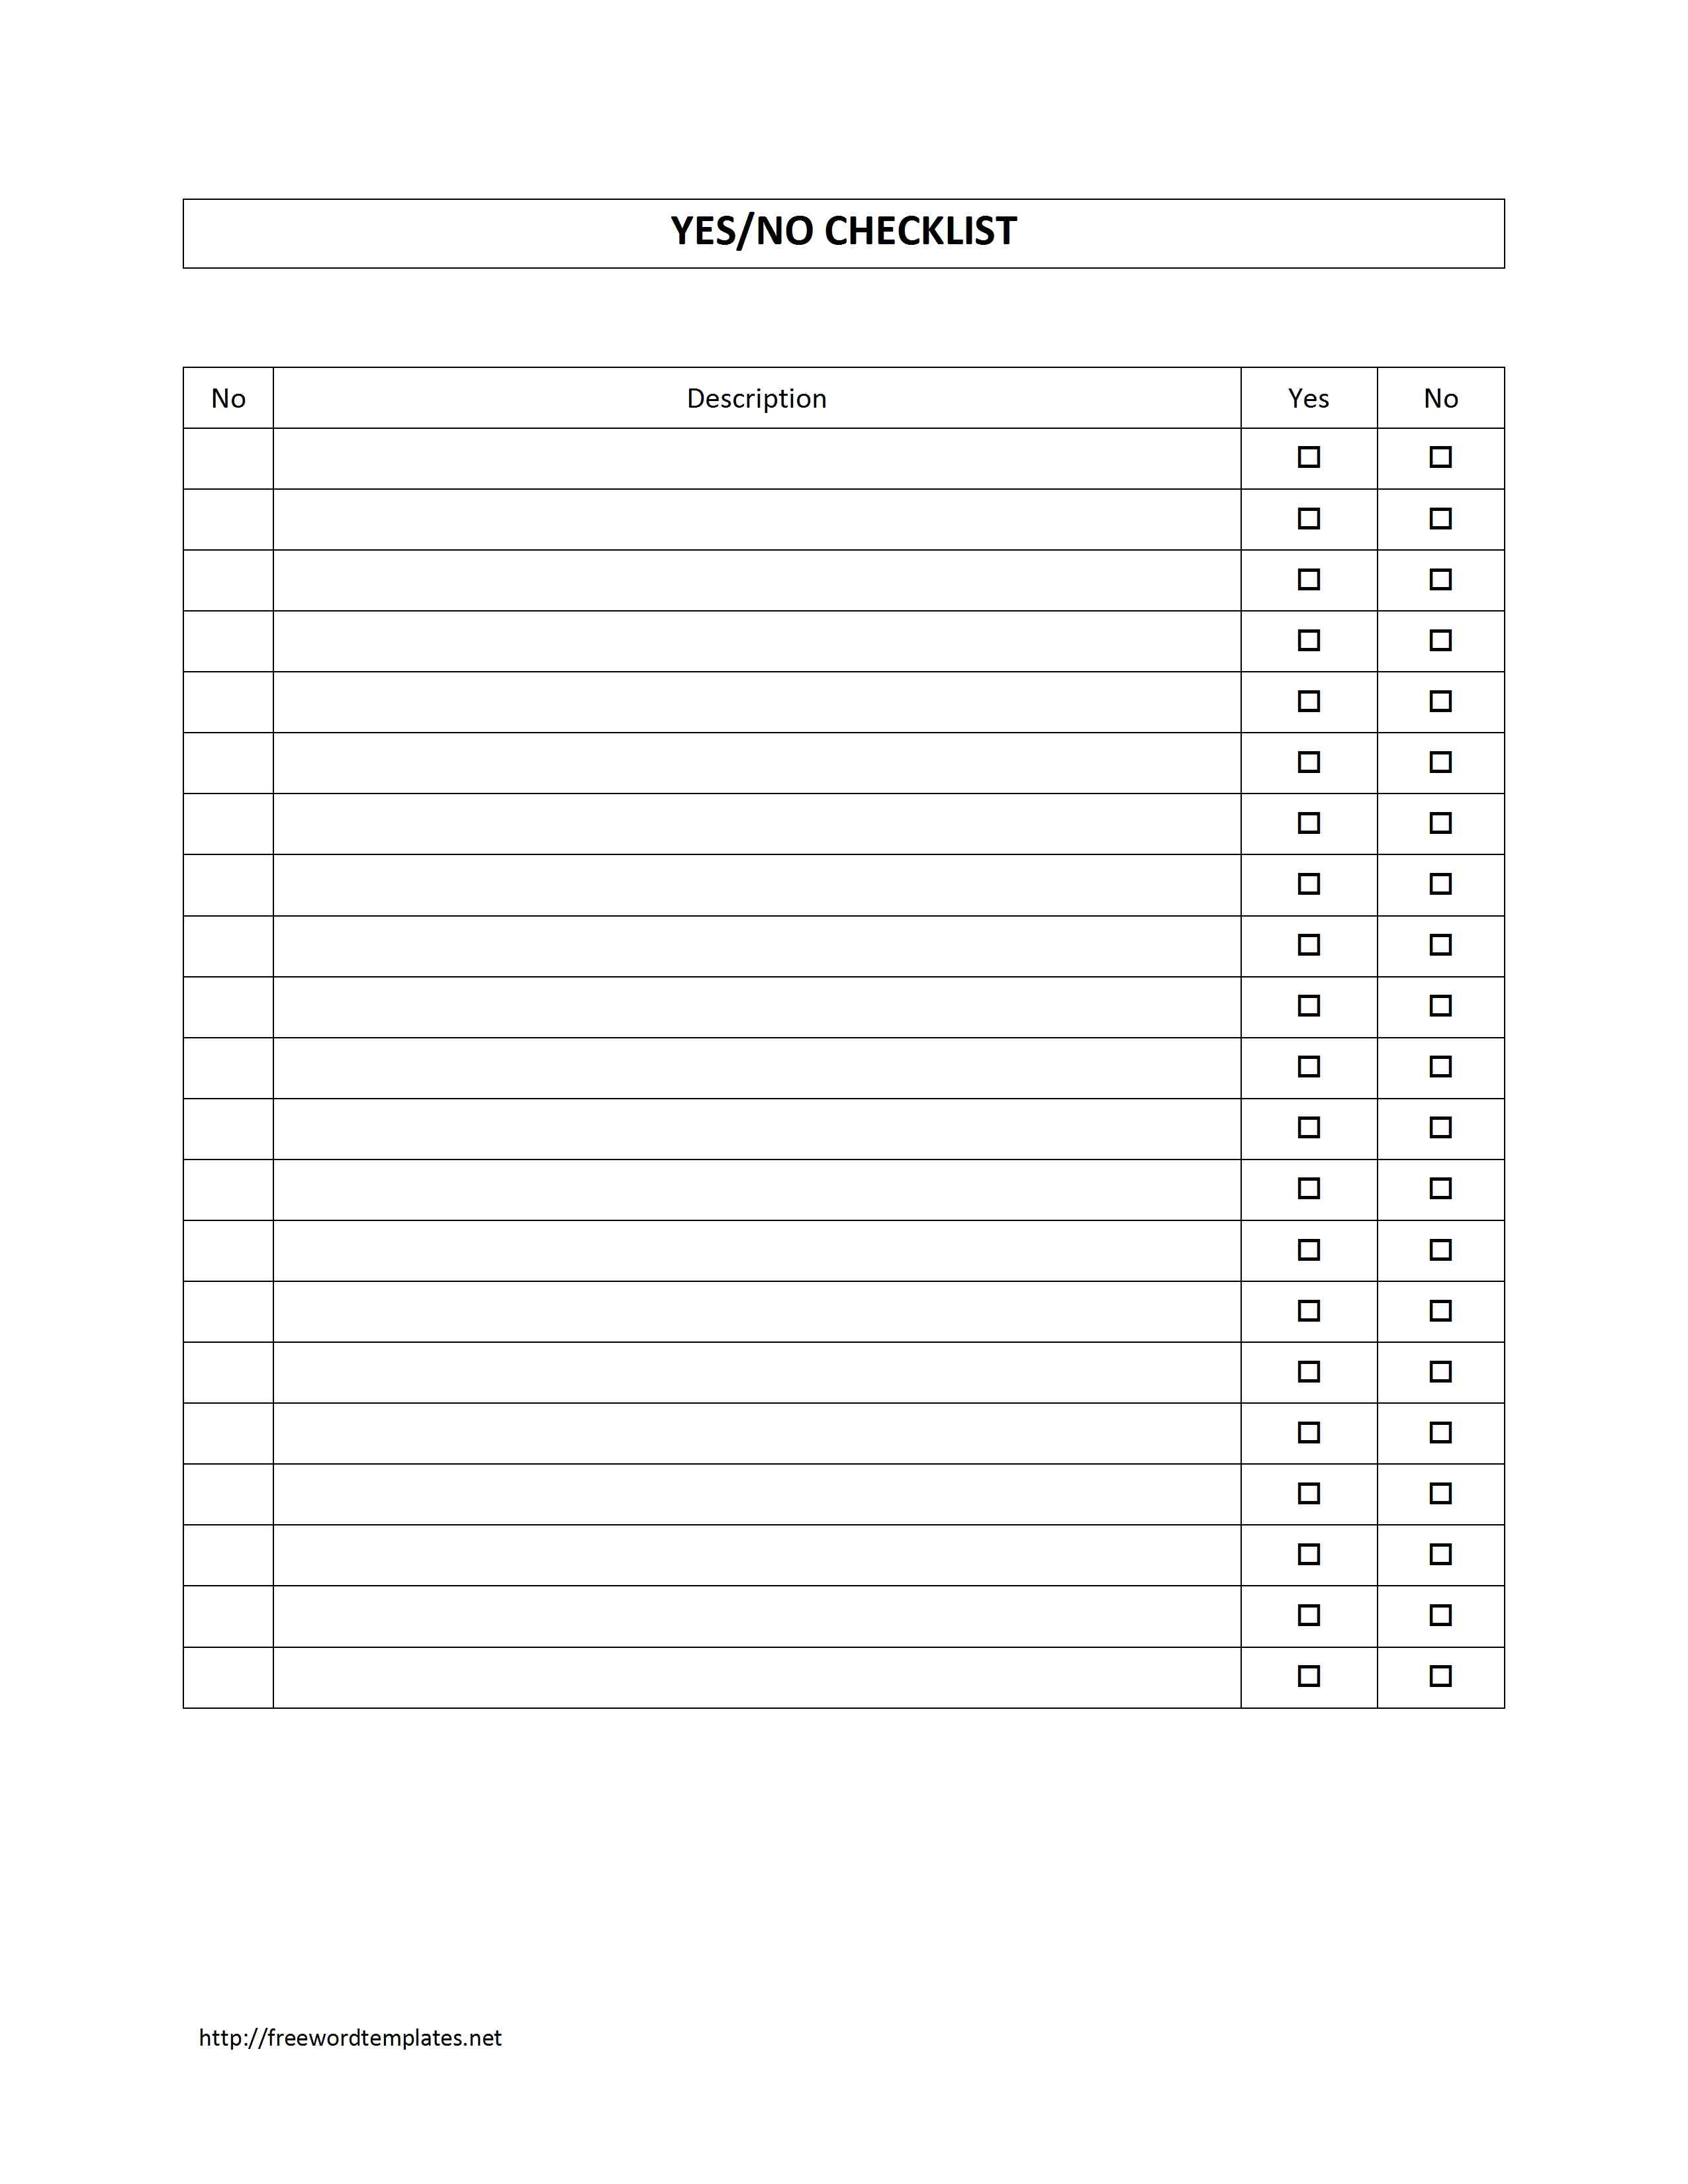 Checklist Template Word Yes No Survey Word Template The checklist ...